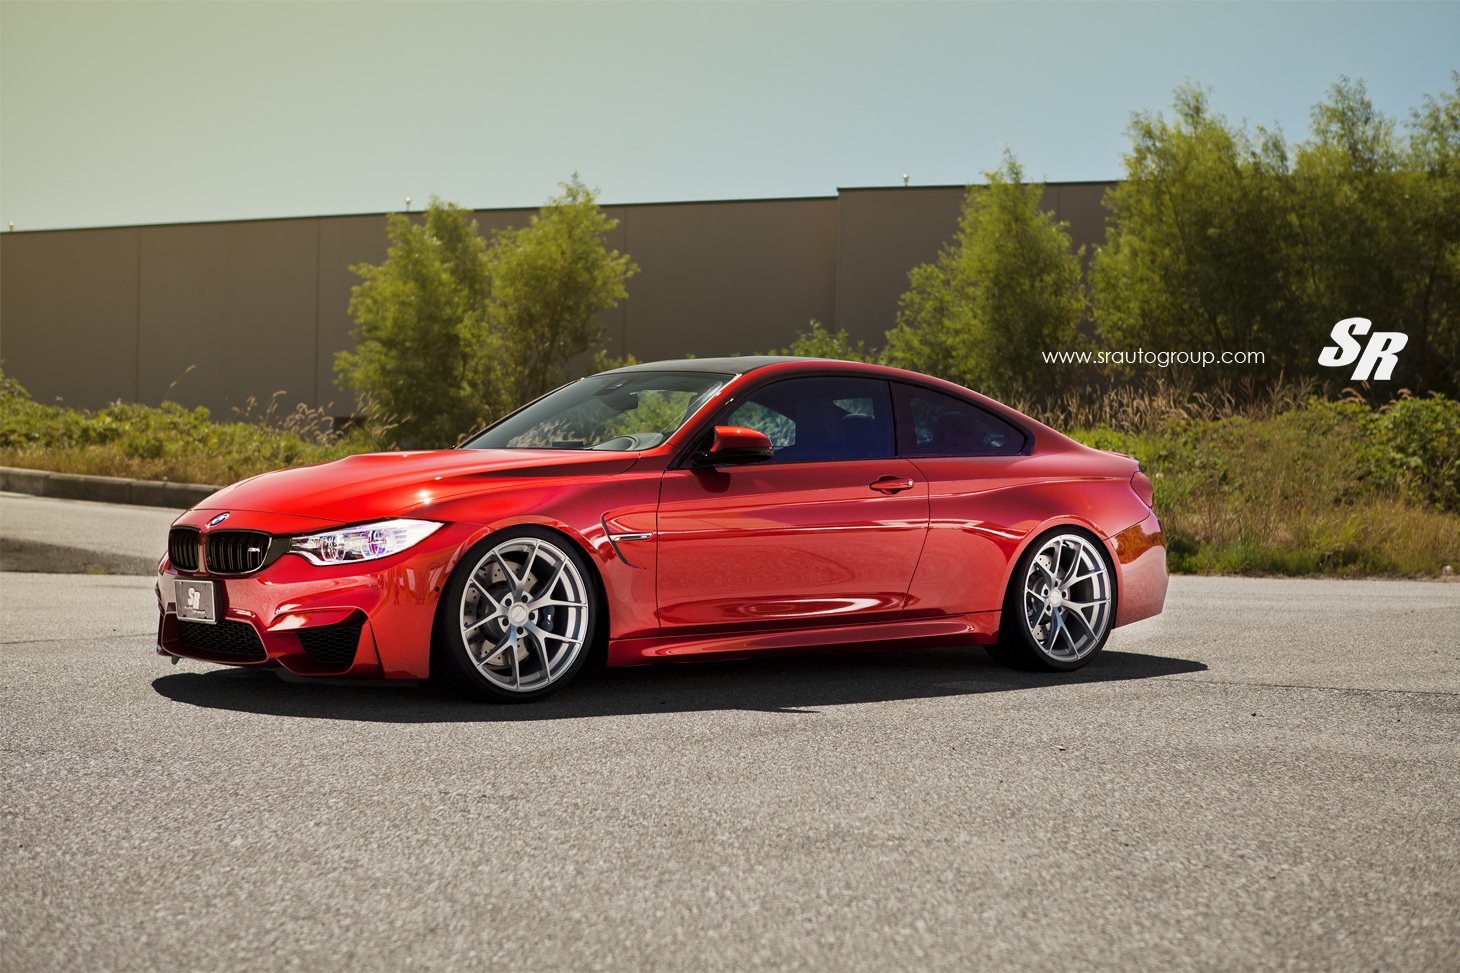 bmw, M, 4, Pur, Wheels, Tuning, Red Wallpaper